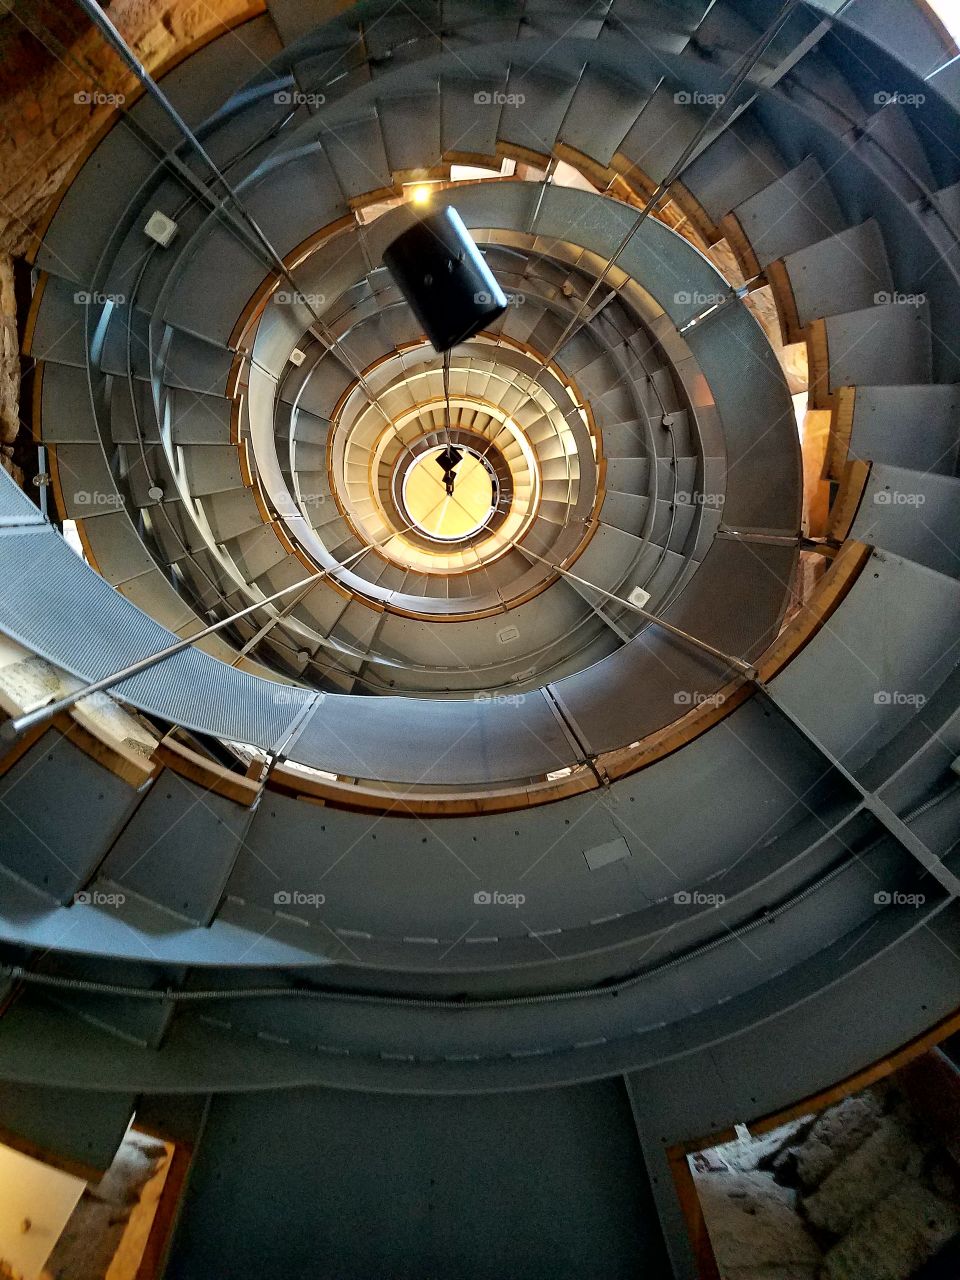 Spiral staircase inside The Lighthouse, Glasgow